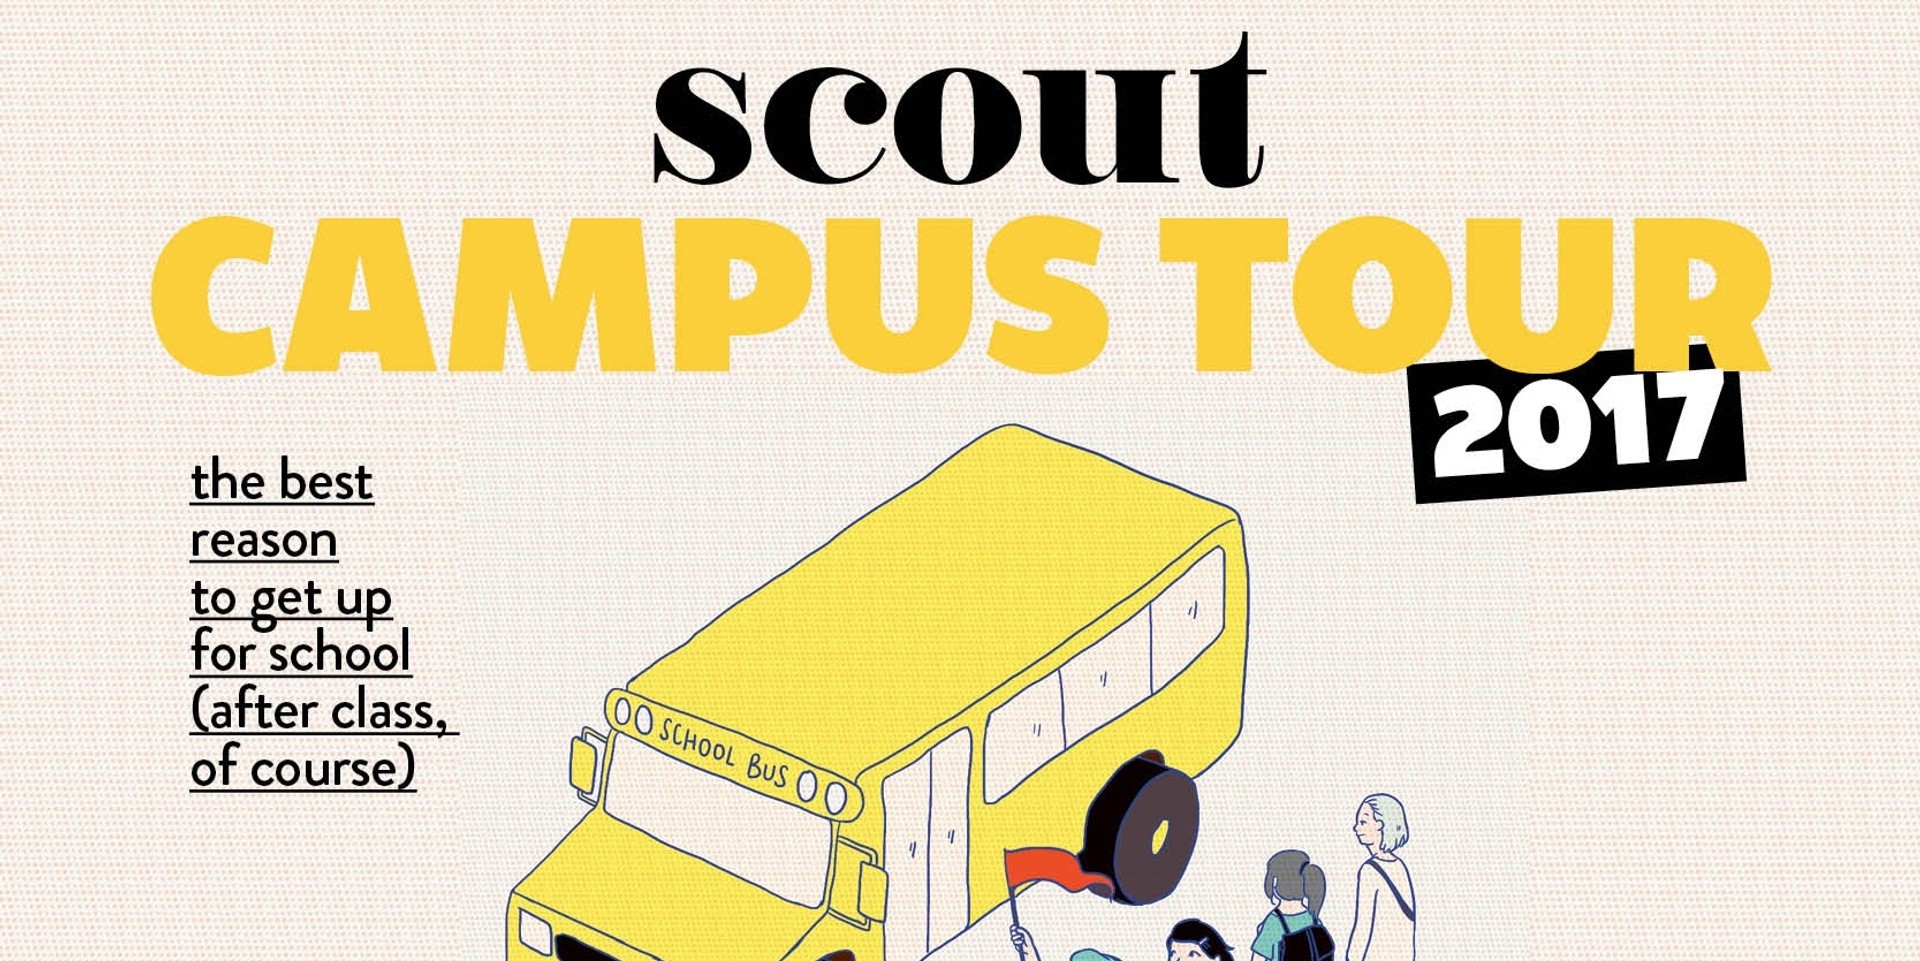 Scout kicks off this year's campus tours in UP Diliman